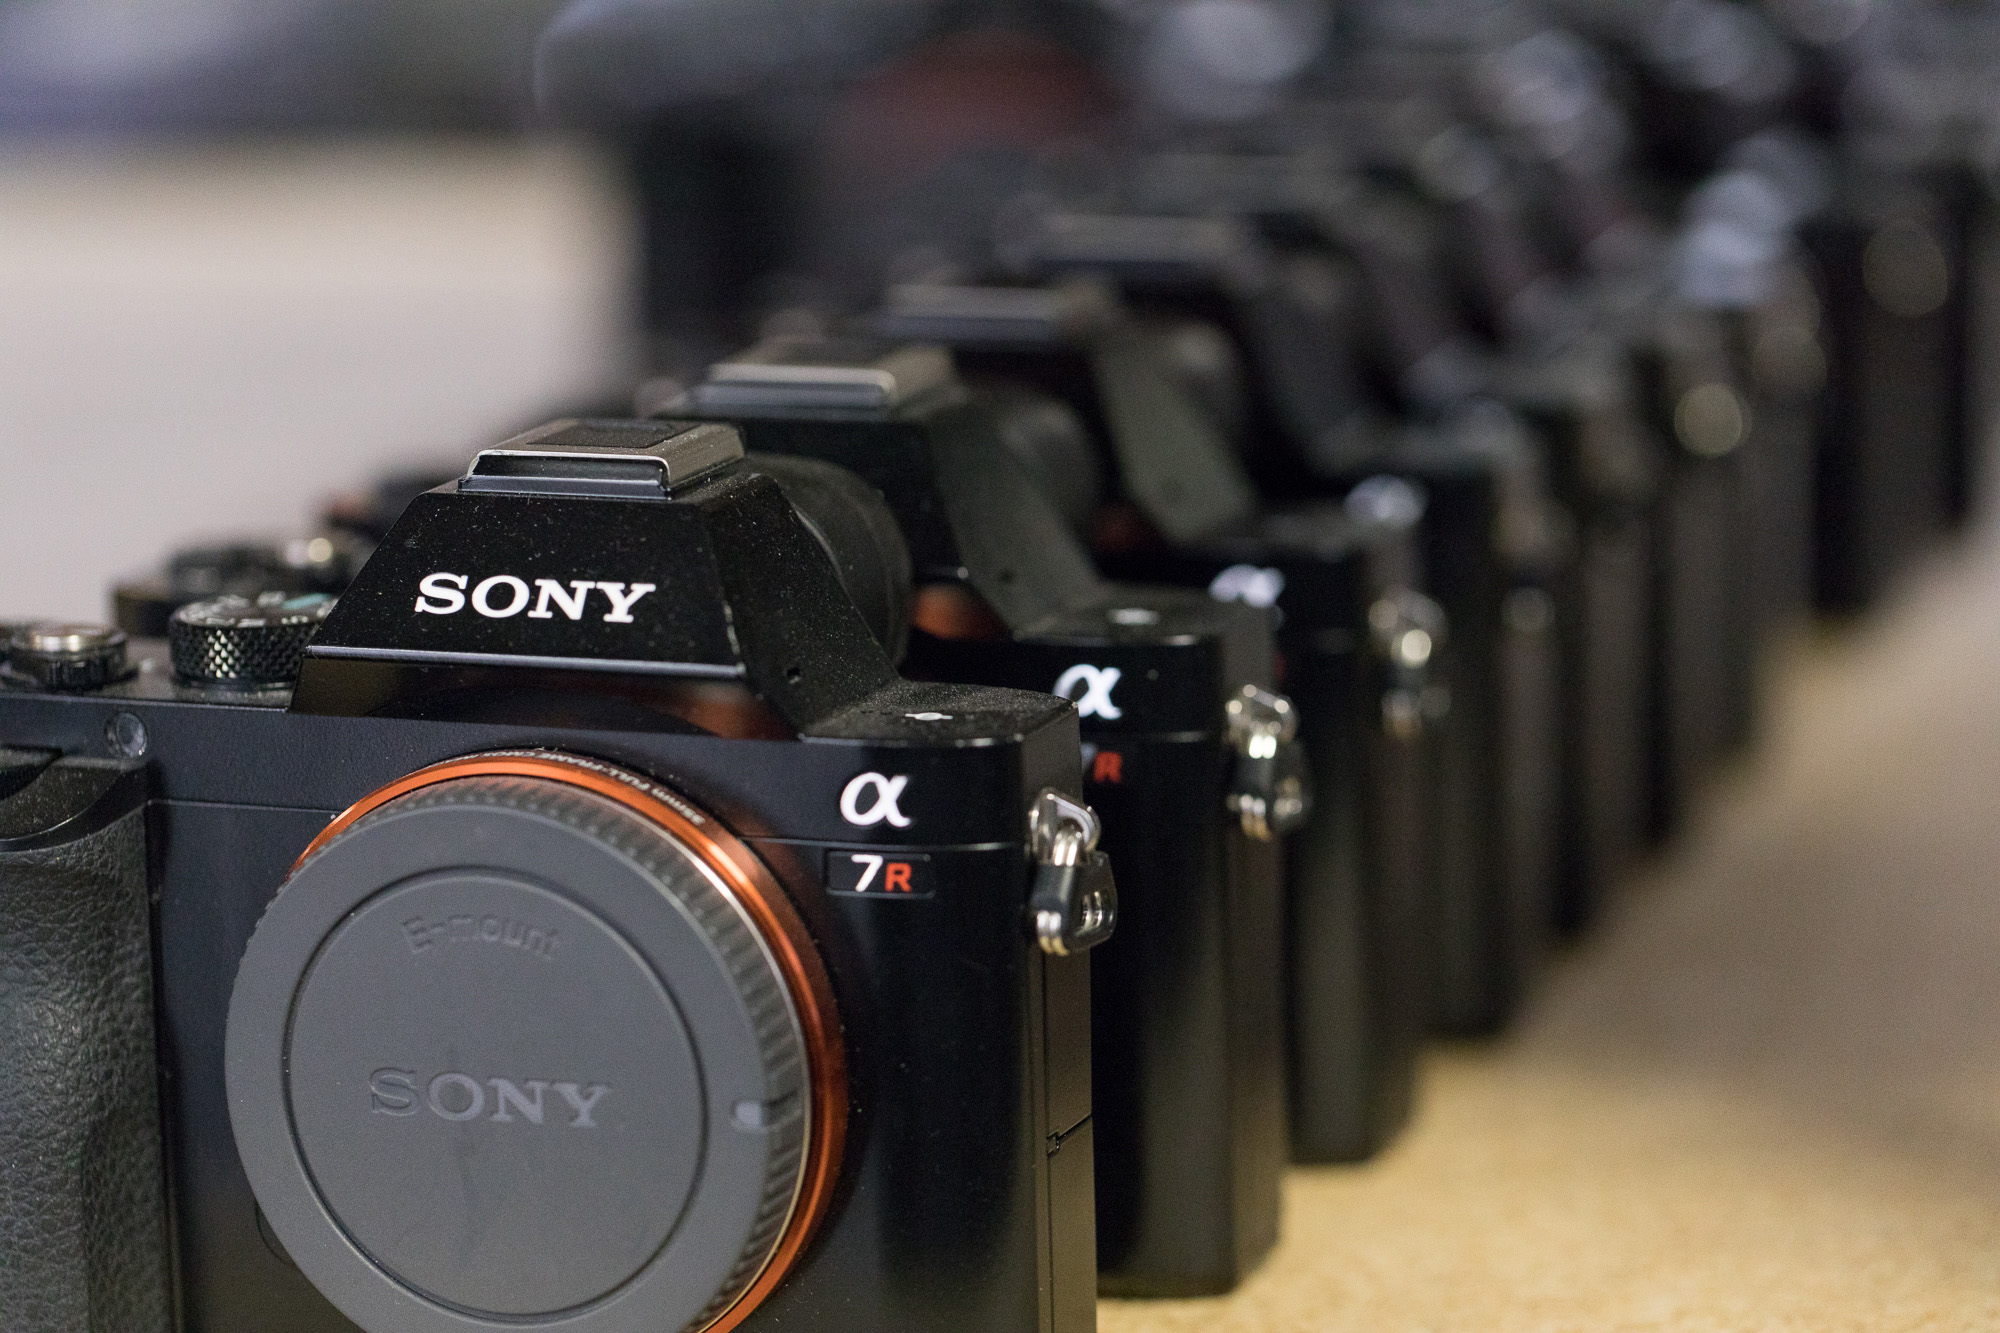 Reasons (not) to get the Sony A7R III ⎜ Fenchel & Janisch Film Production